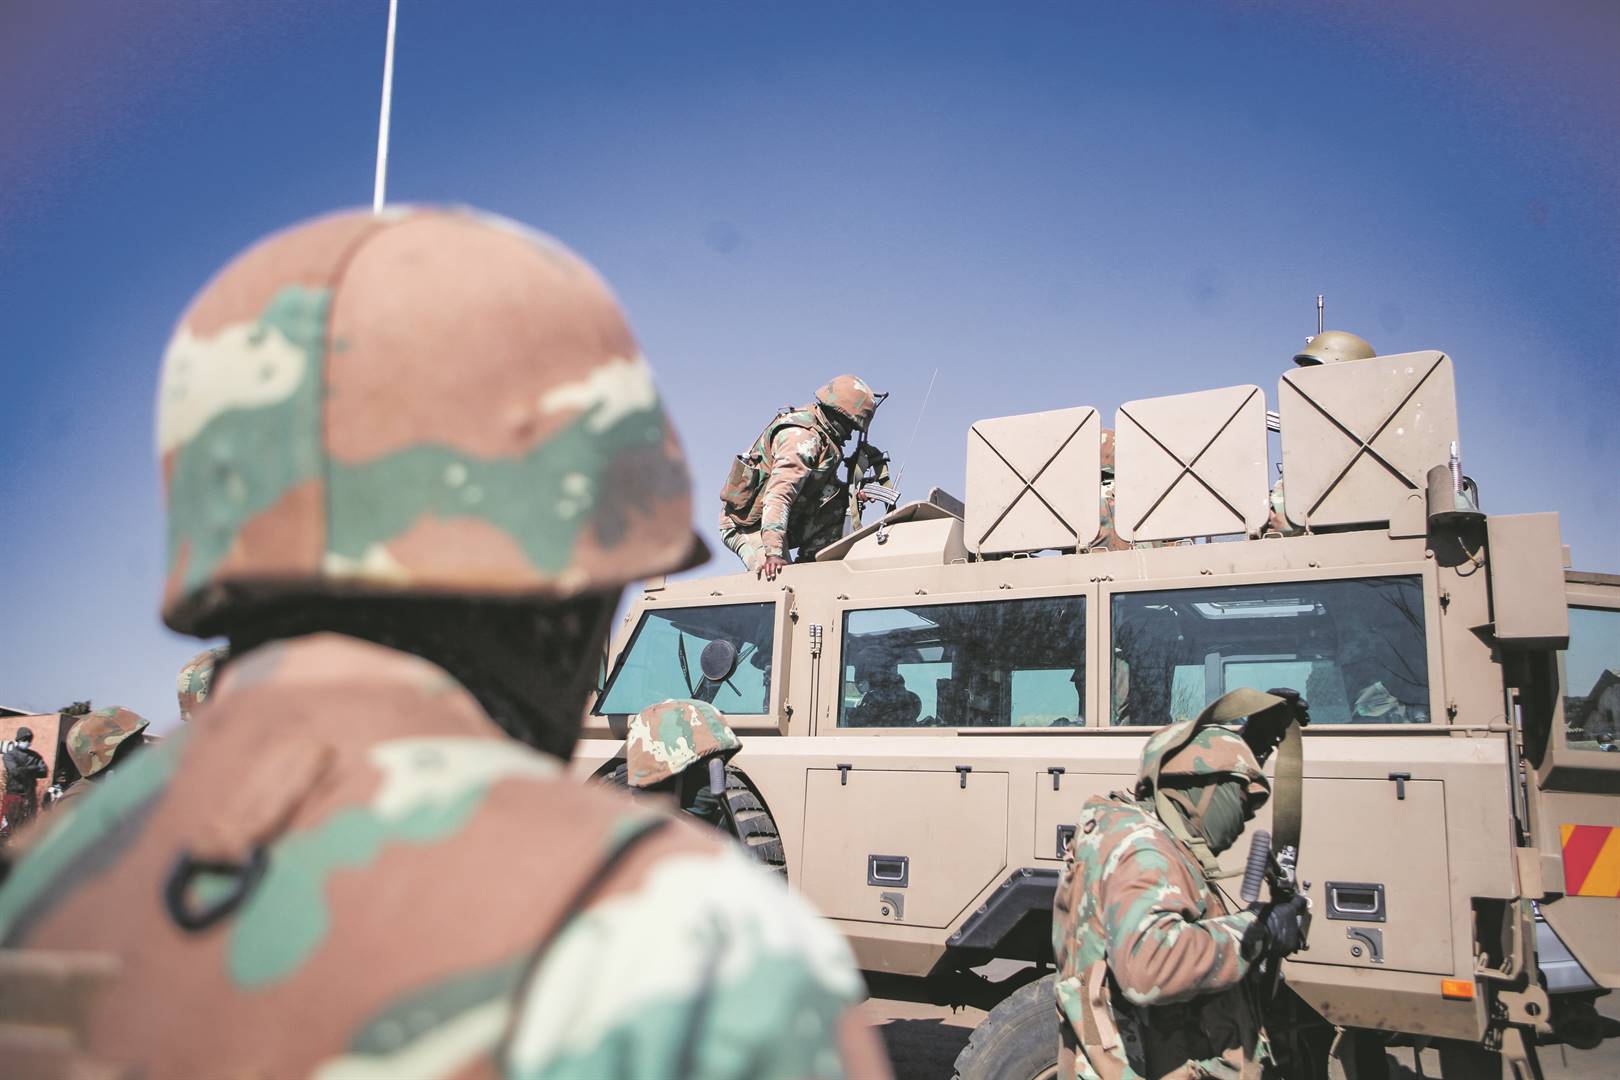 An estimated 2 600 South African soldiers have already been deployed in the DRC and Mozambique on peacekeeping missions